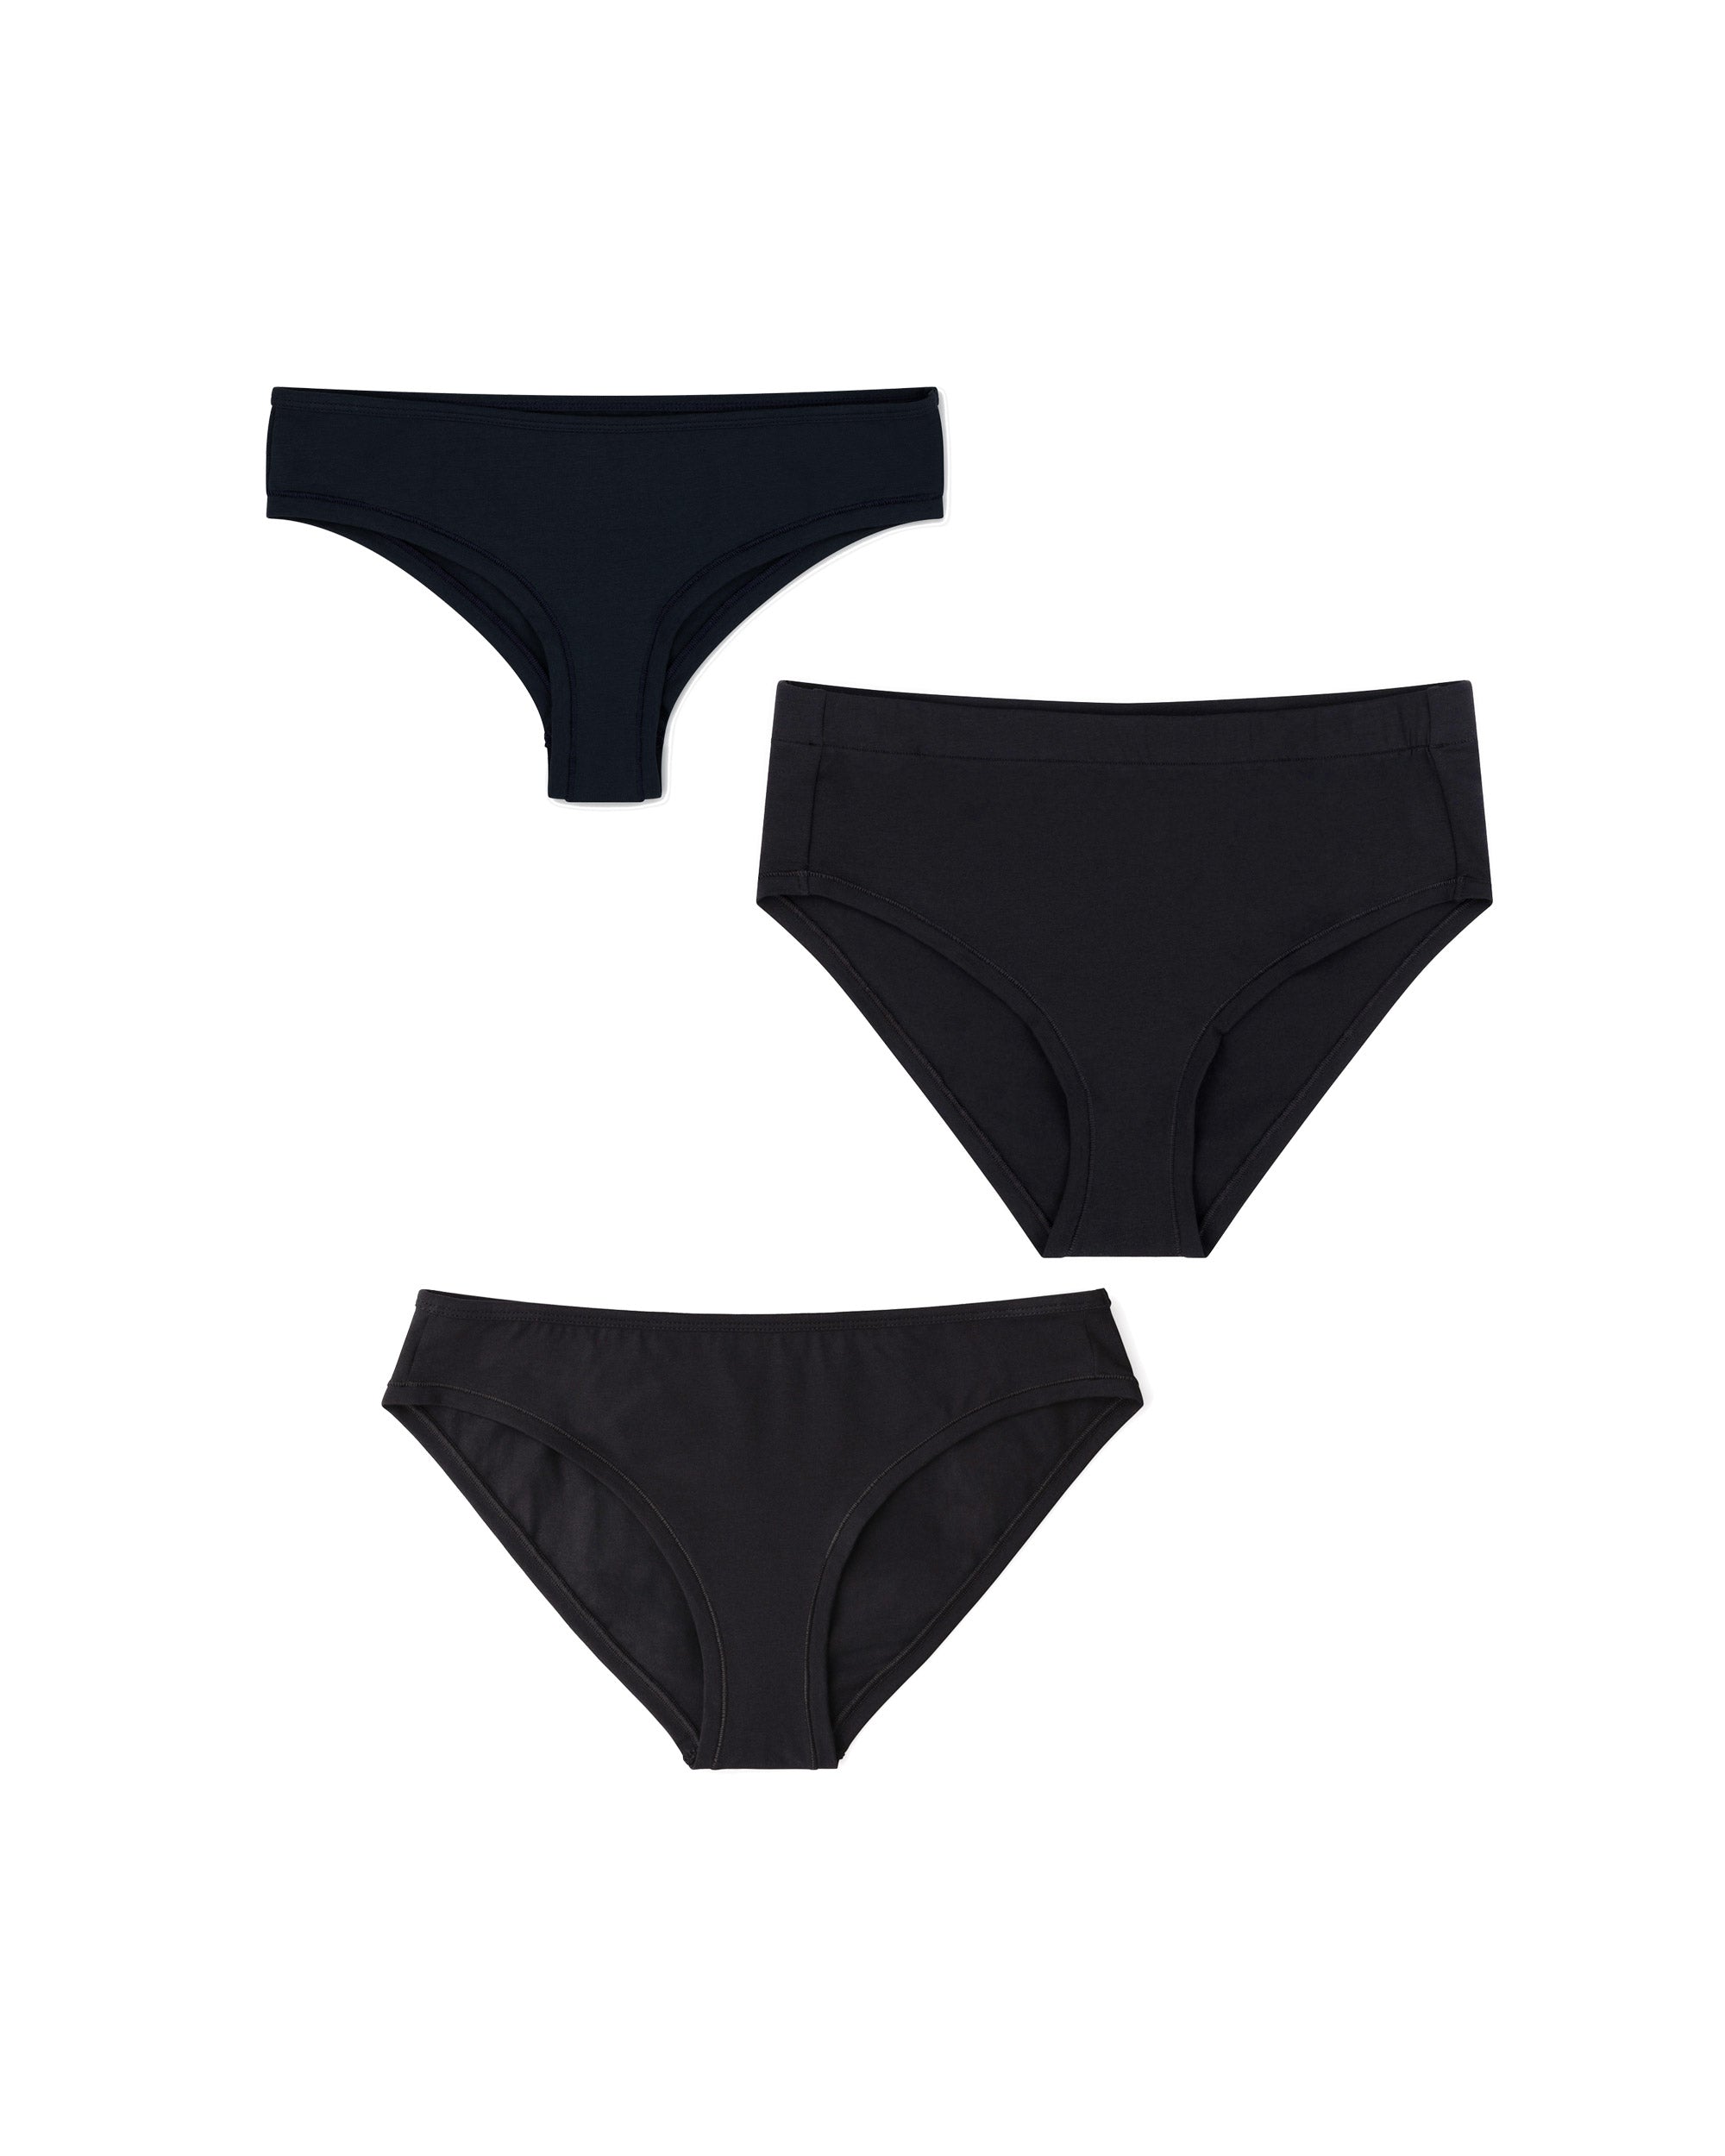 ONE Essentials high rise, mid rise and cheeky fit brief in black